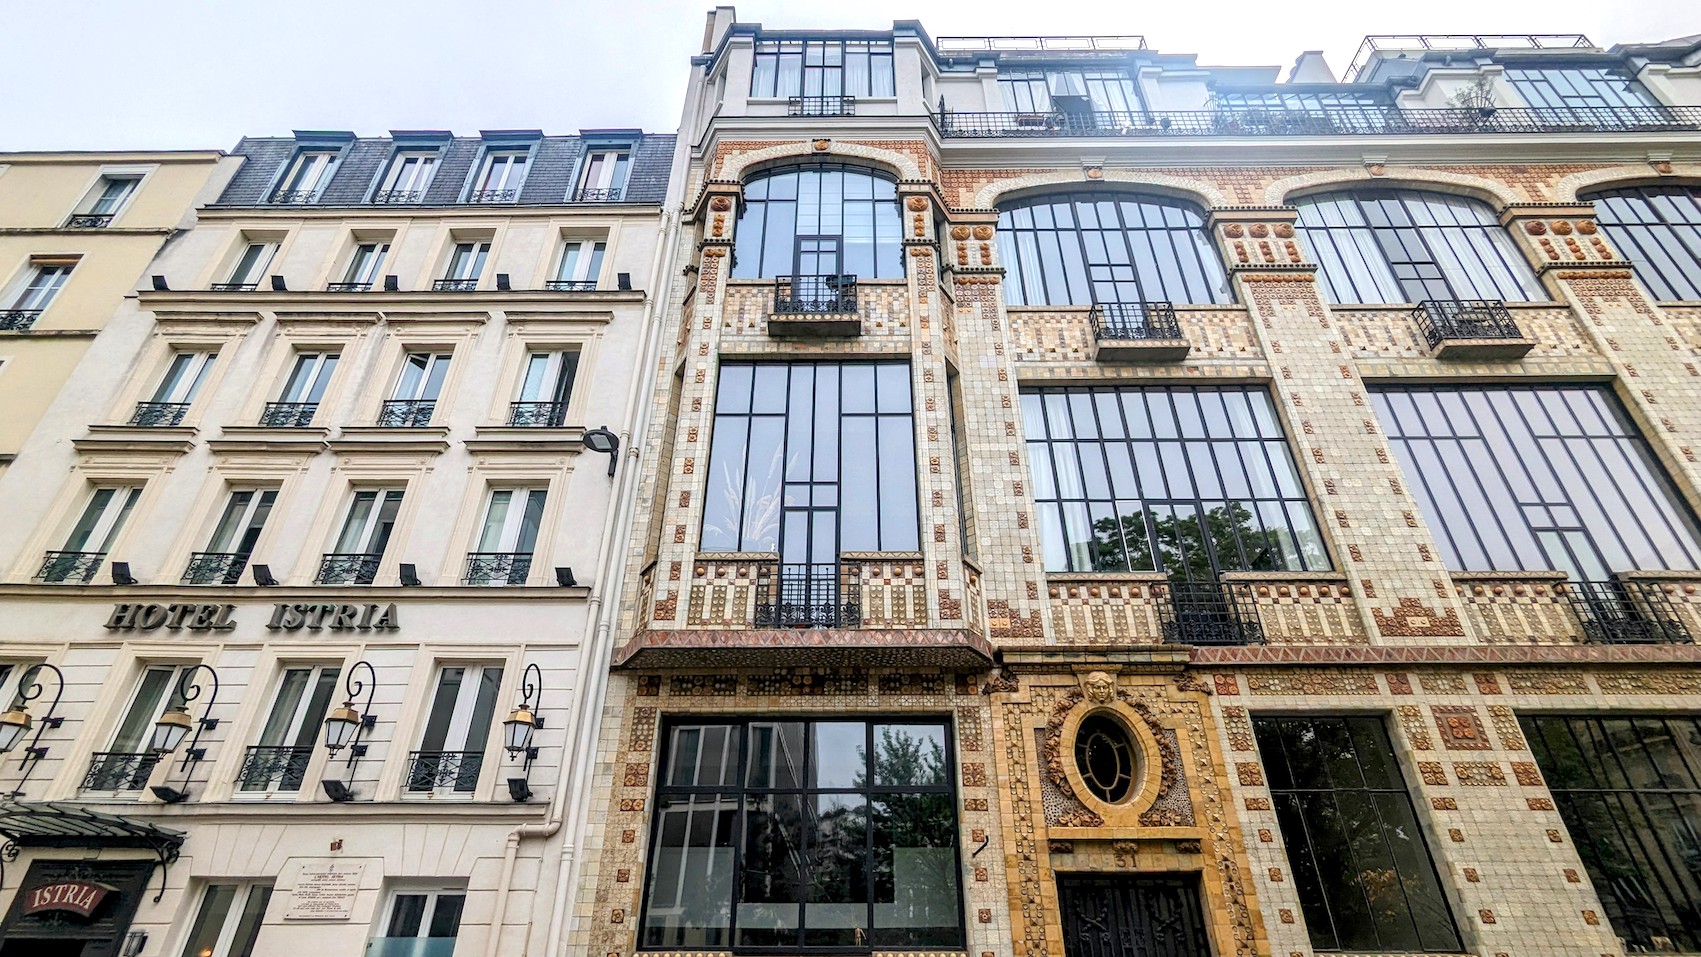 The Art Nouveau house that once was the home of Man Ray and Kiki de Montparnasse, seen from the street.